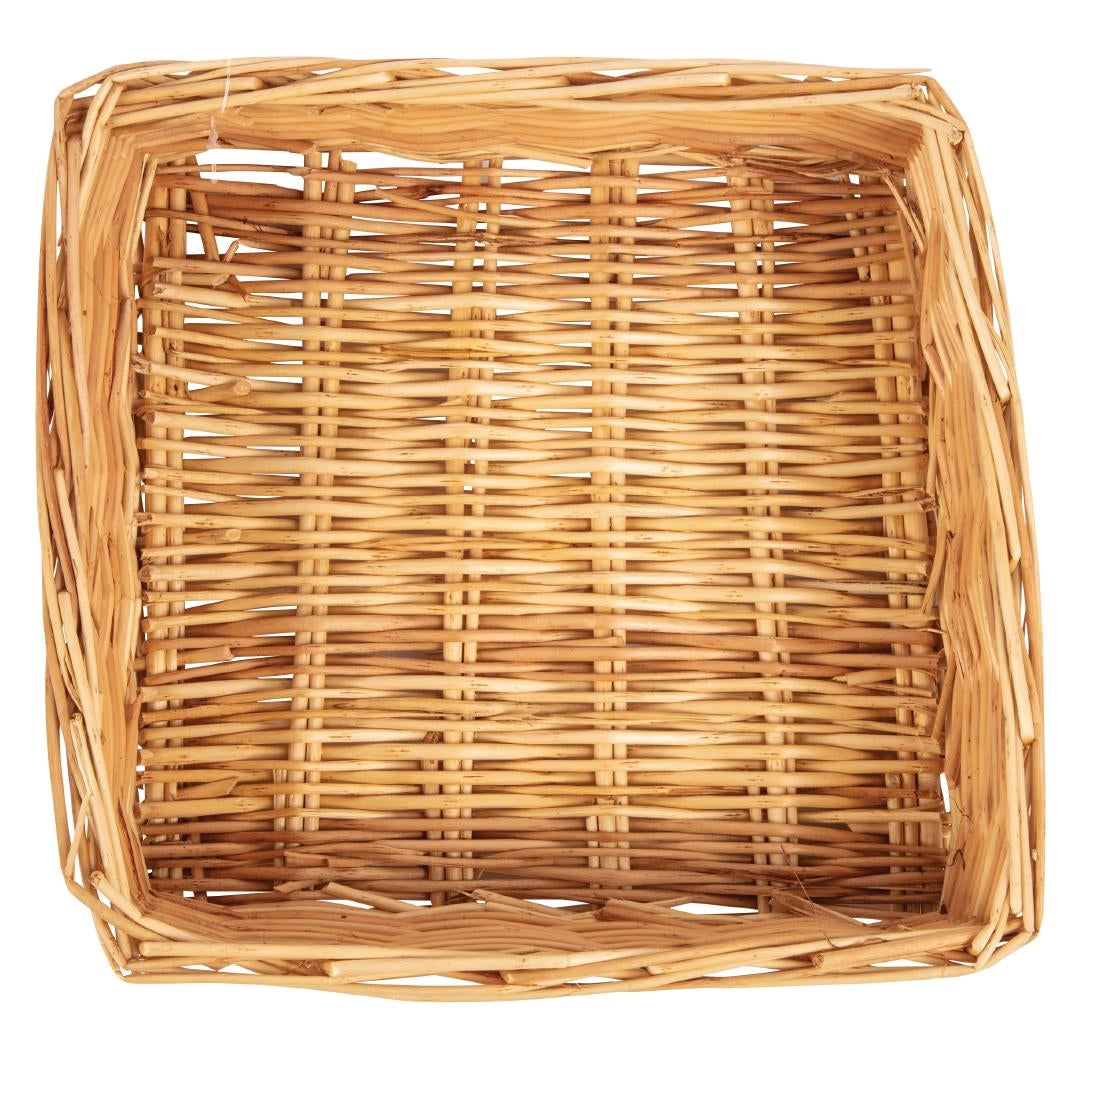 Willow Square Table Basket